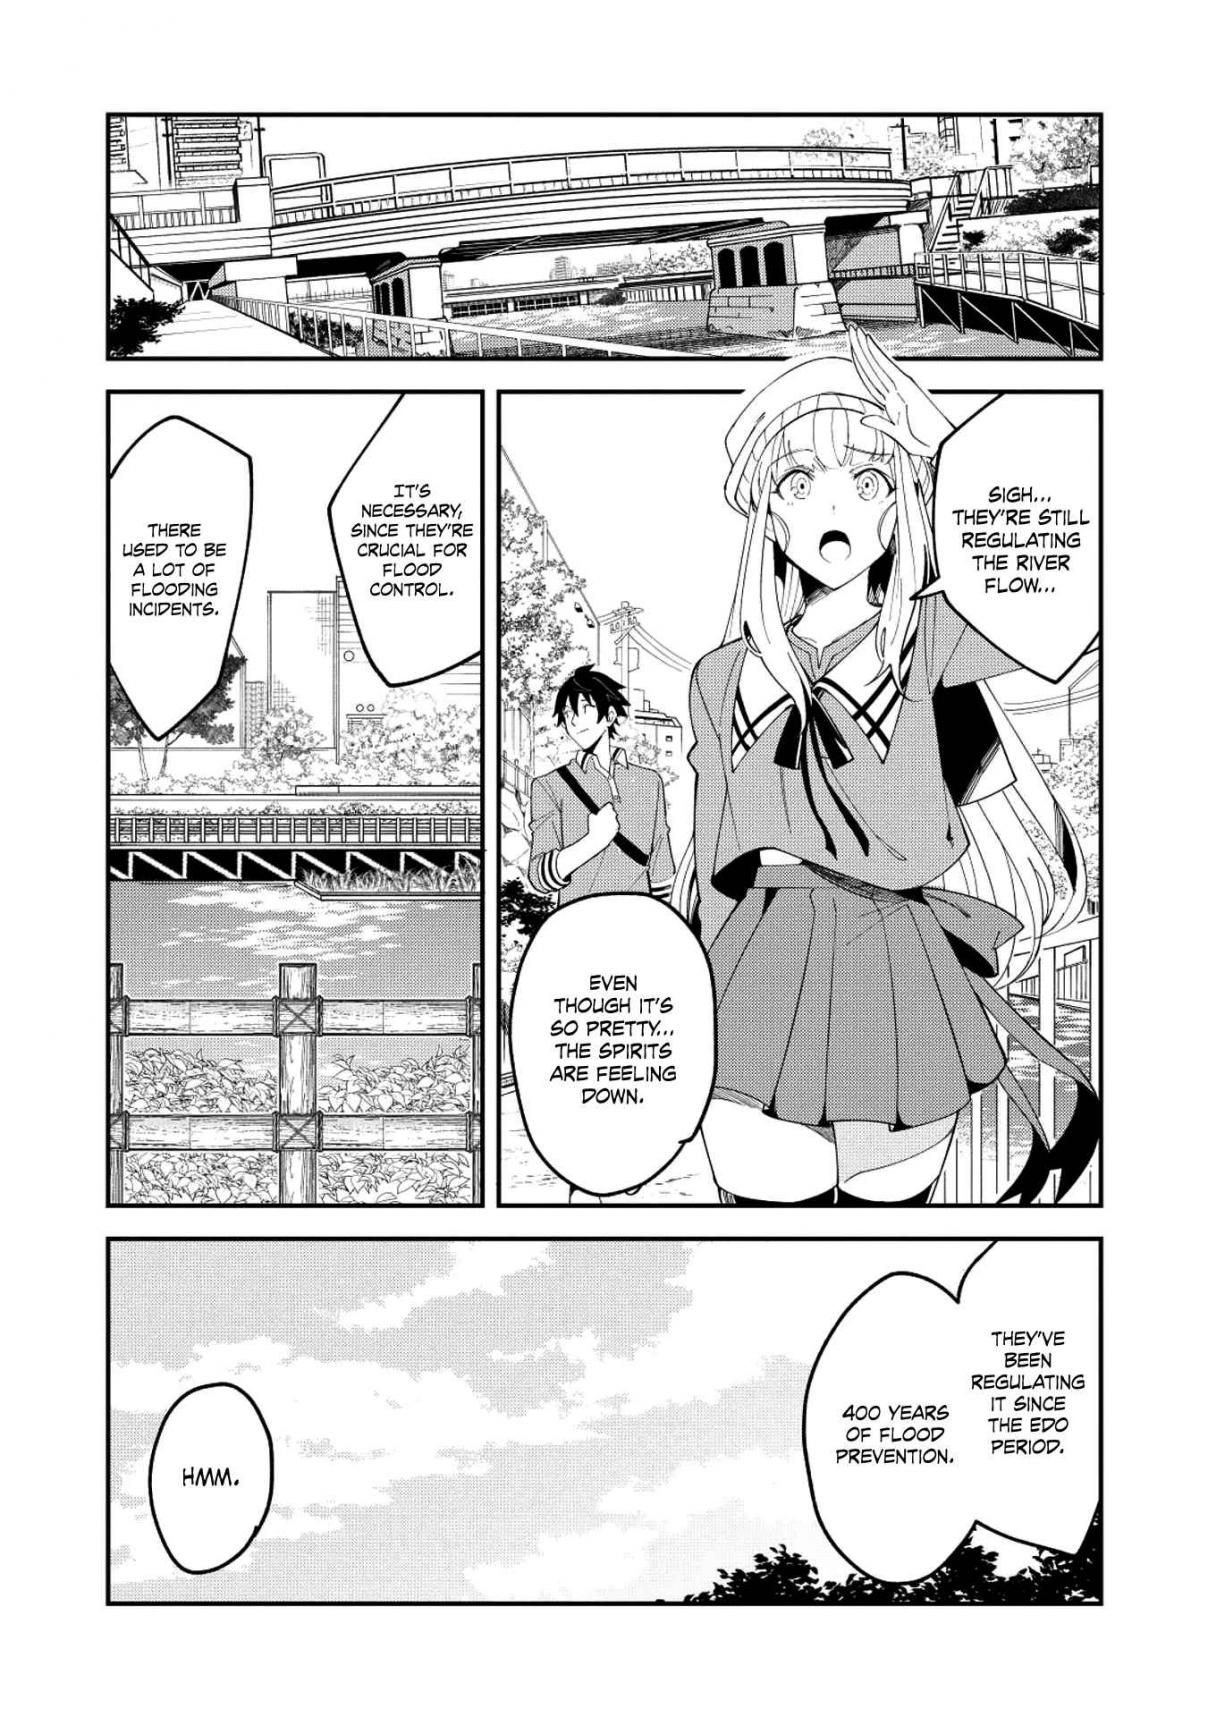 Welcome to Japan, Elf san! Ch. 9 The Weekend Off